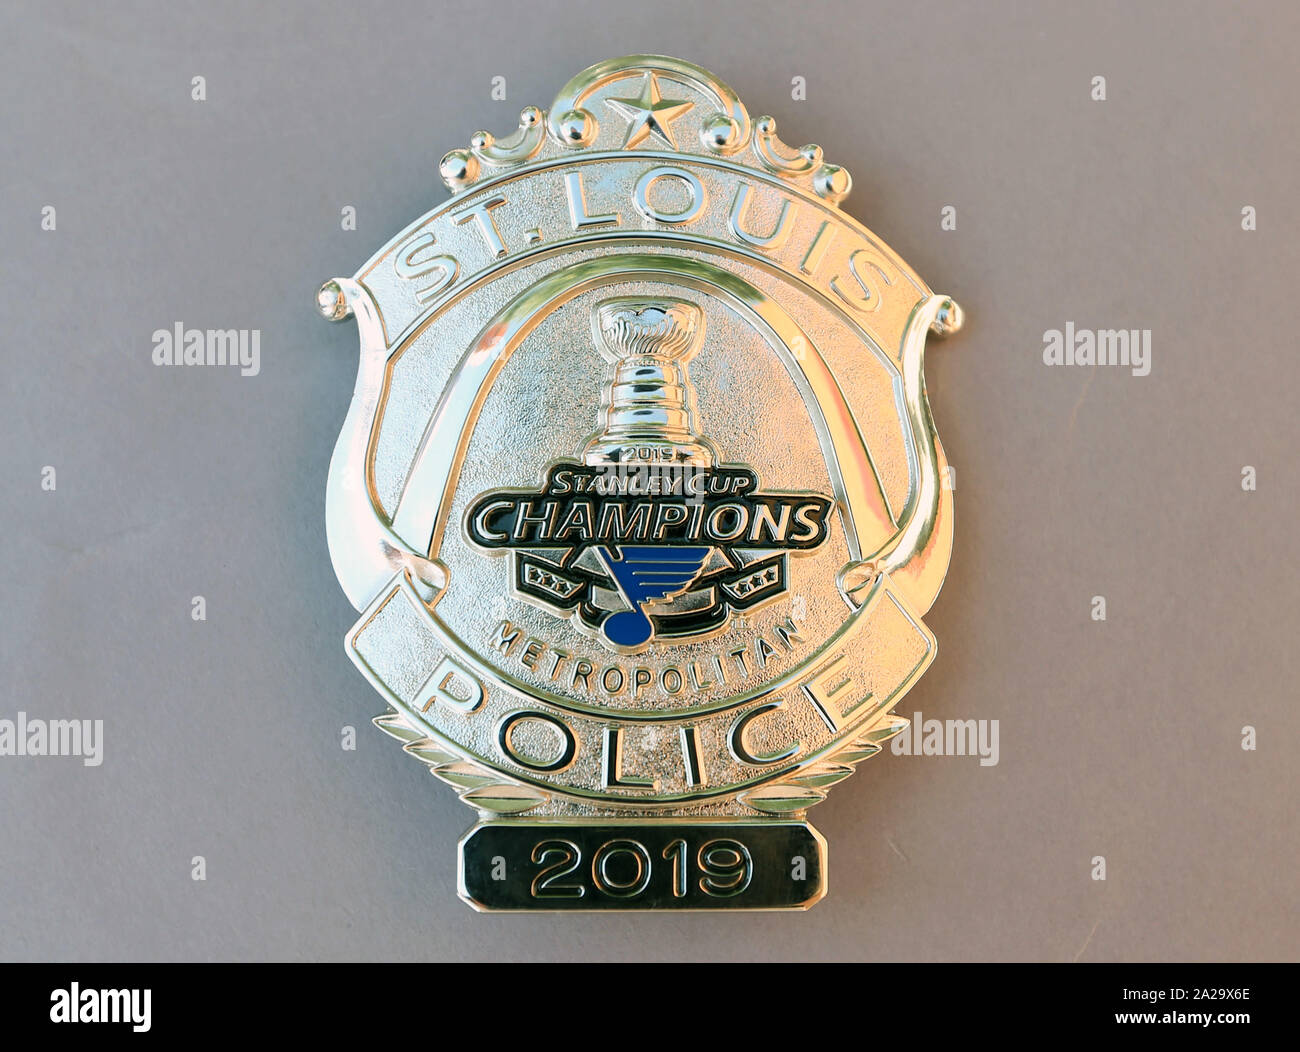 St. Louis, United States. 01st Oct, 2019. Nearly 1300 St. Louis policemen will be wearing a new badge to support the St. Louis Blues winning the Stanley Cup, it was revealed on October 1, 2019. The National Hockey League has given the St. Louis Metropolitian Police Department permission to make the comemorative badge that they may wear unitl June 1, 2020. The St. Louis Blues defeated the Boston Bruins in the Stanley Cup finals in June to win the franchise's first Stanley Cup. Photo by Bill Greenblatt/UPI Credit: UPI/Alamy Live News Stock Photo